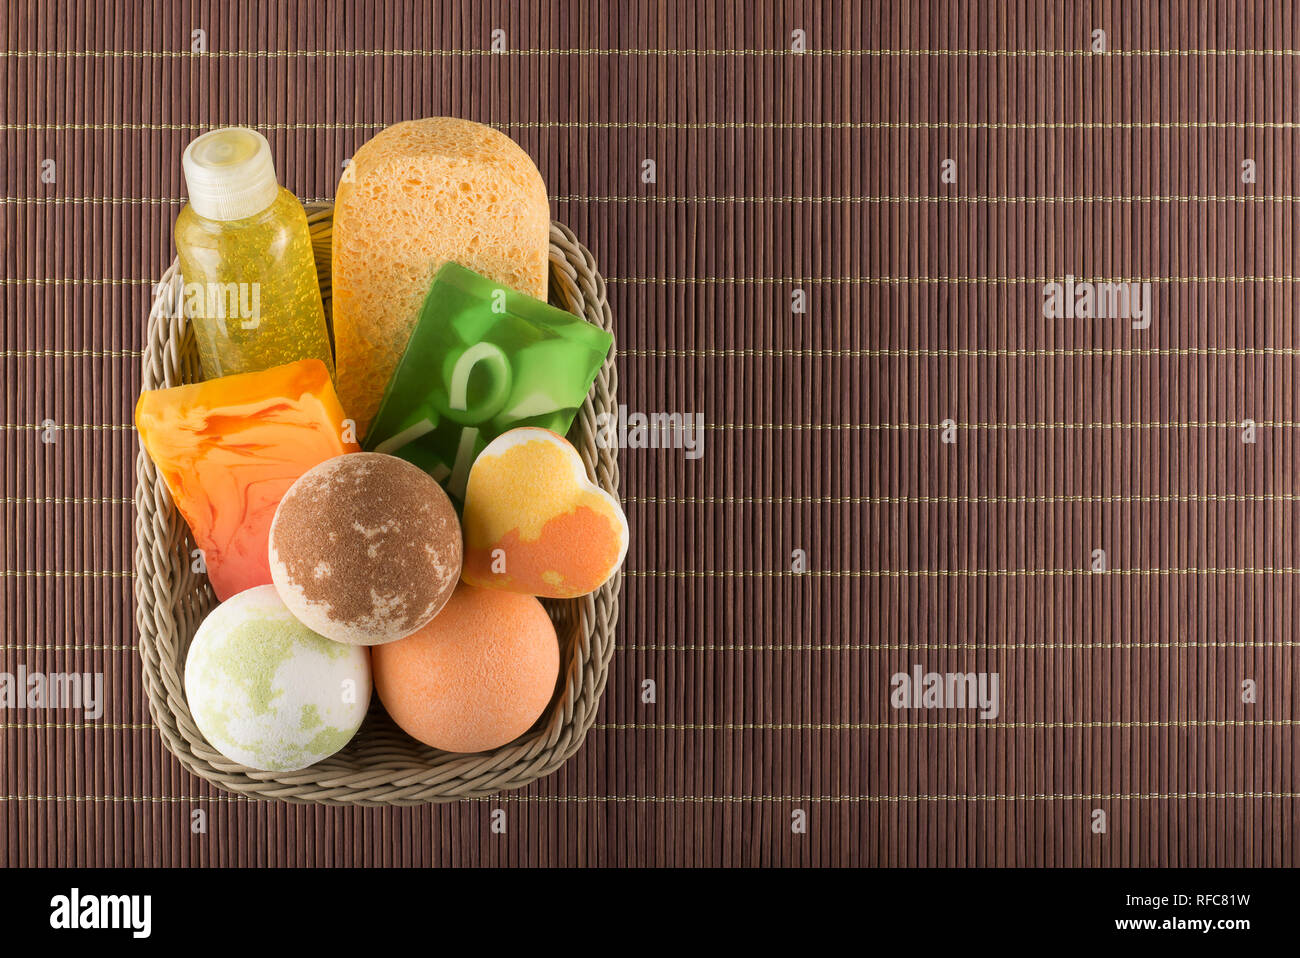 Сosmetic bath products in the basket on a bamboo placemat Stock Photo